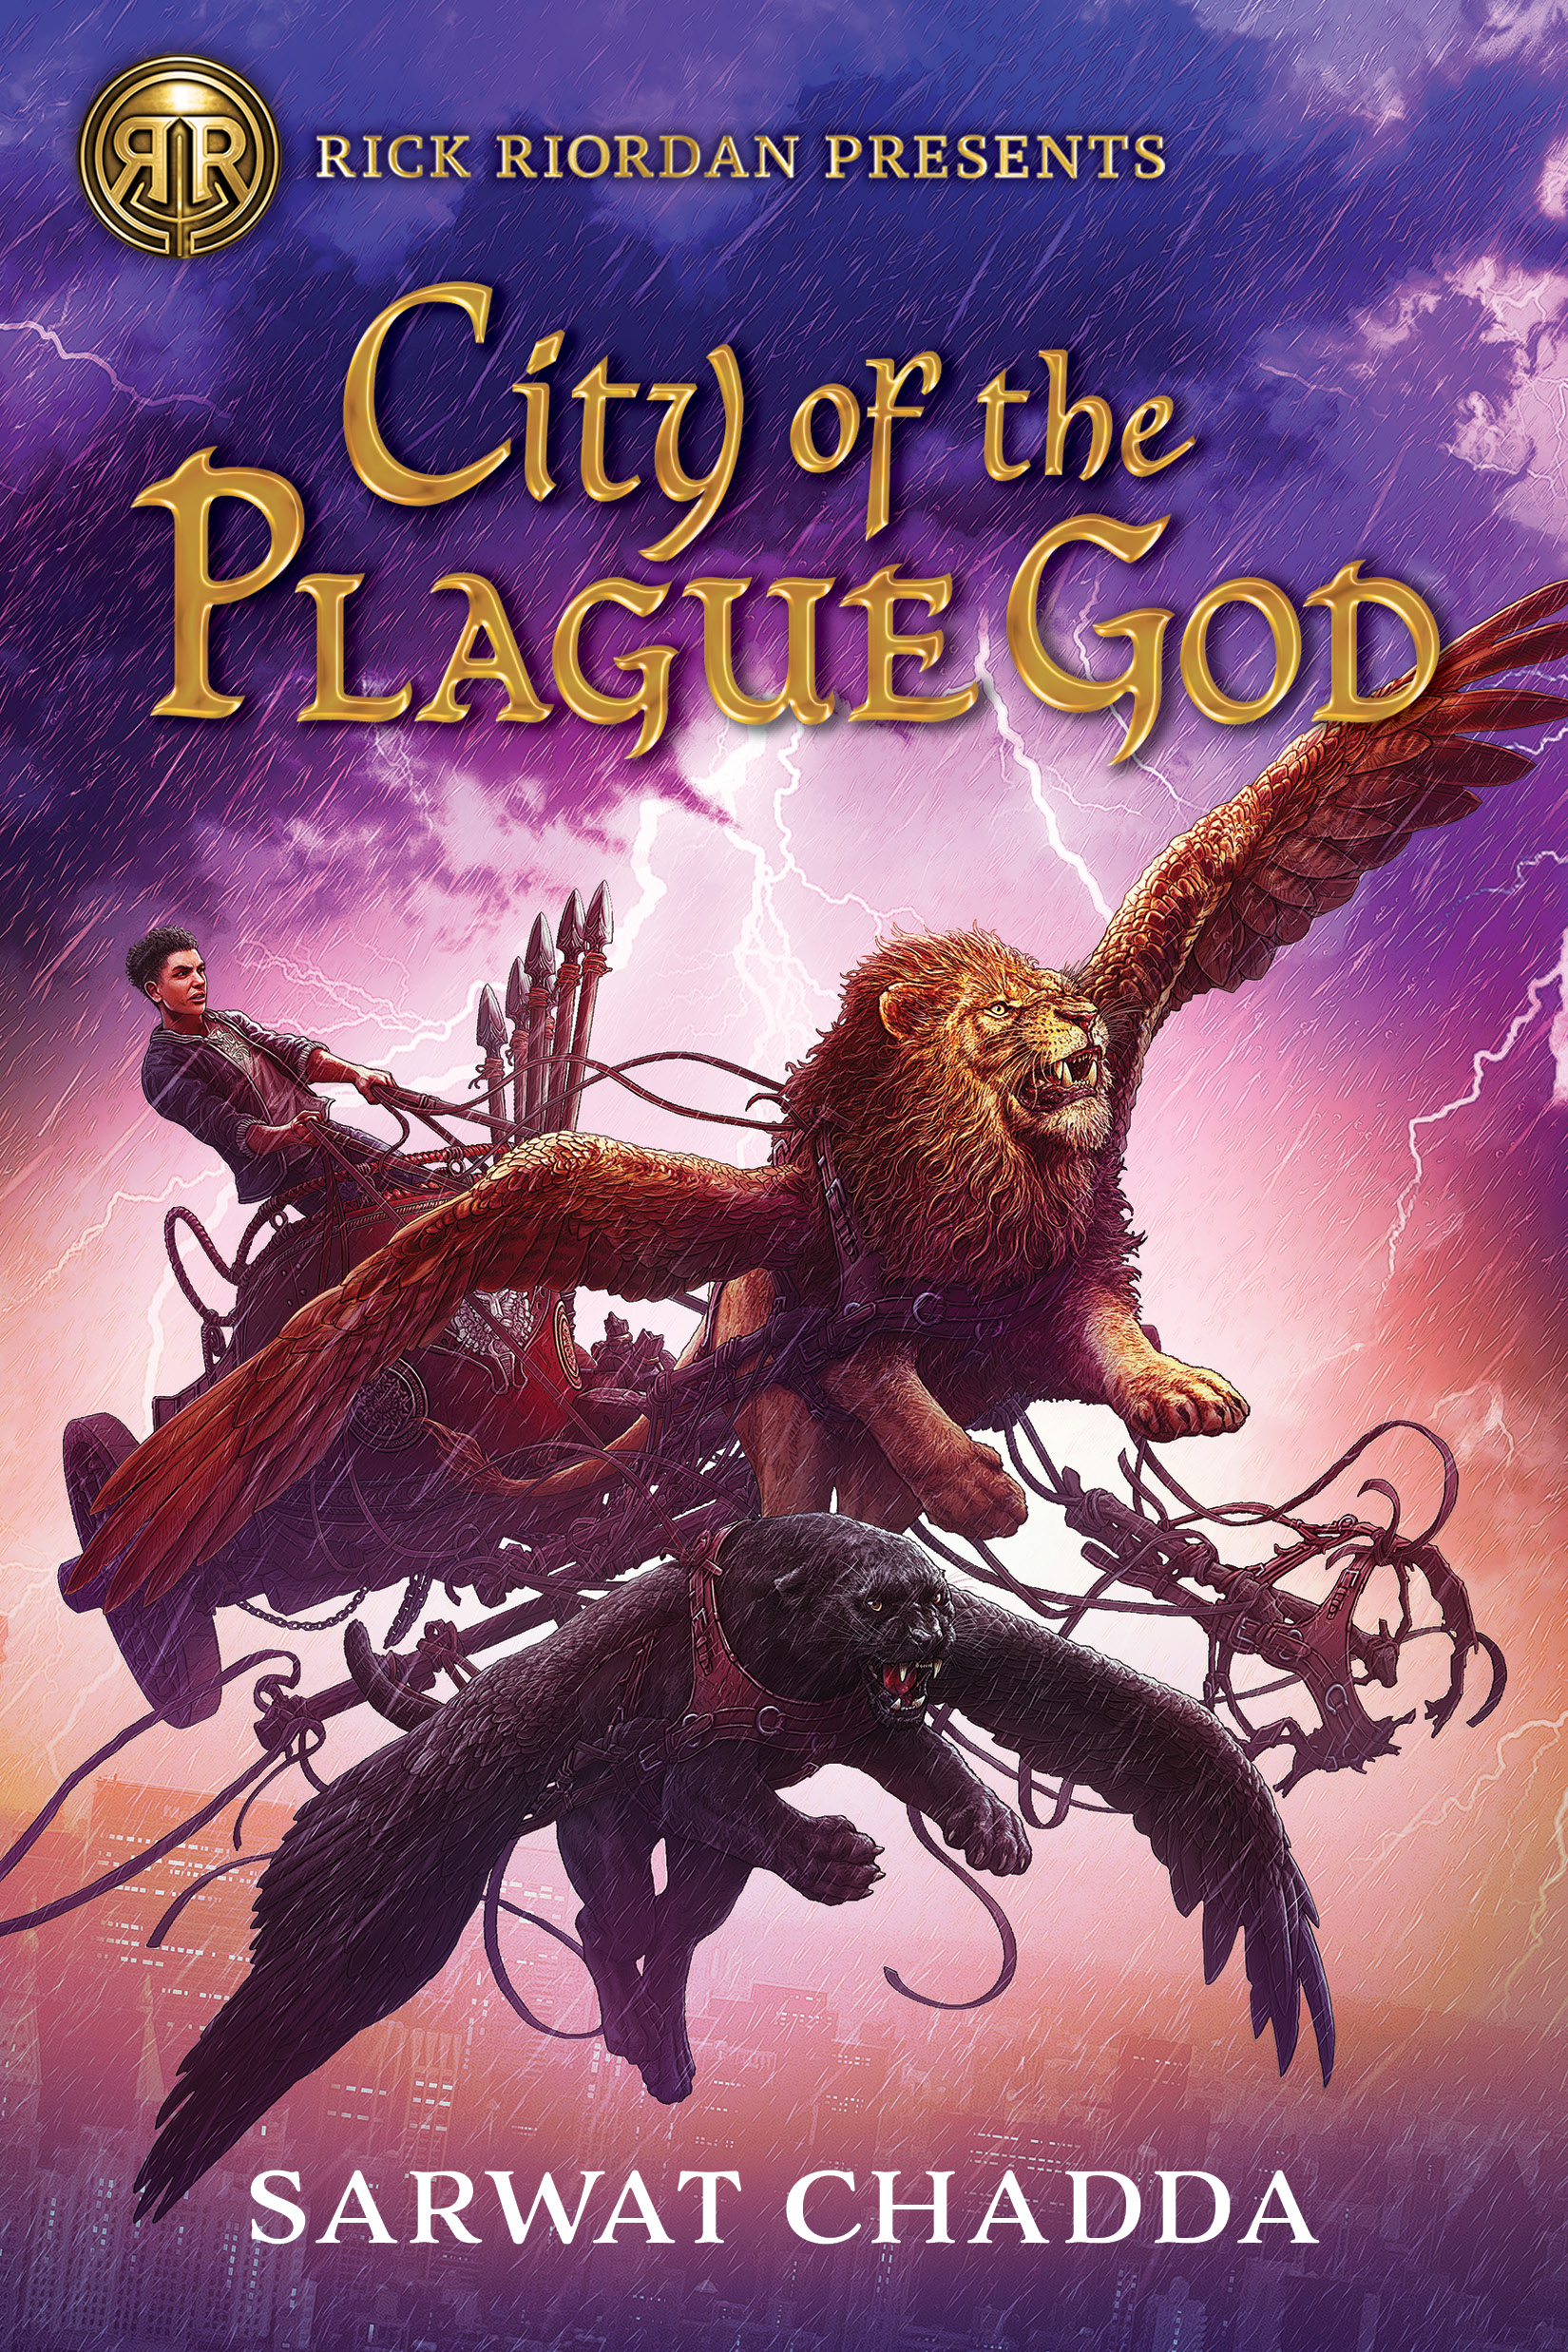 Virtual event with Sarwat Chadda/City of the Plague God